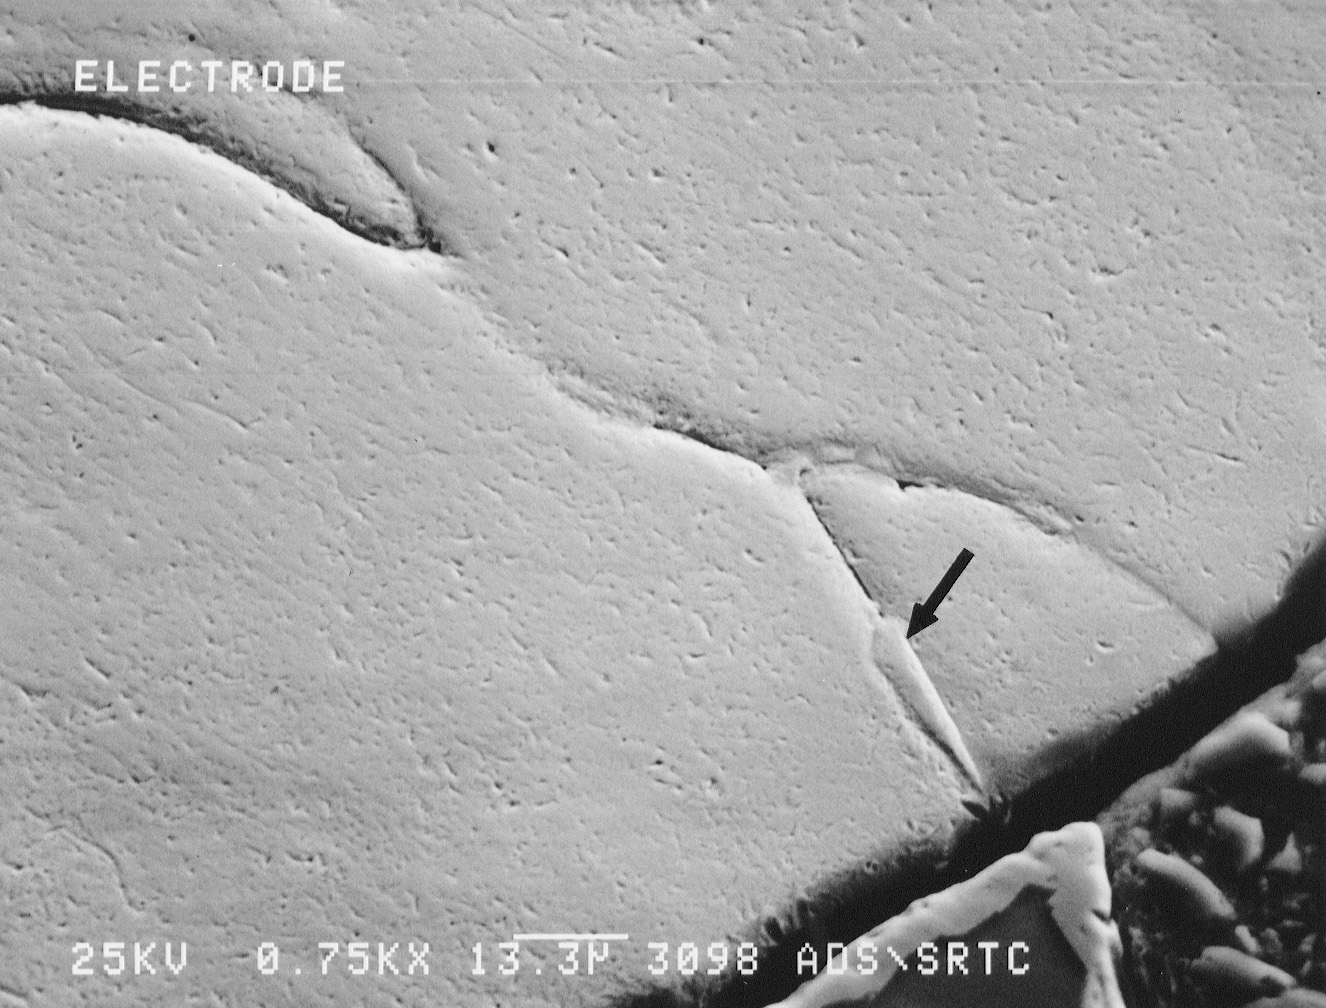 Figure 8. SEM photograph of the molybdenum electrode. EDX spectra indicated the presence of antimony on the grain boundaries. Nickel from the Inconel sheath was also present.